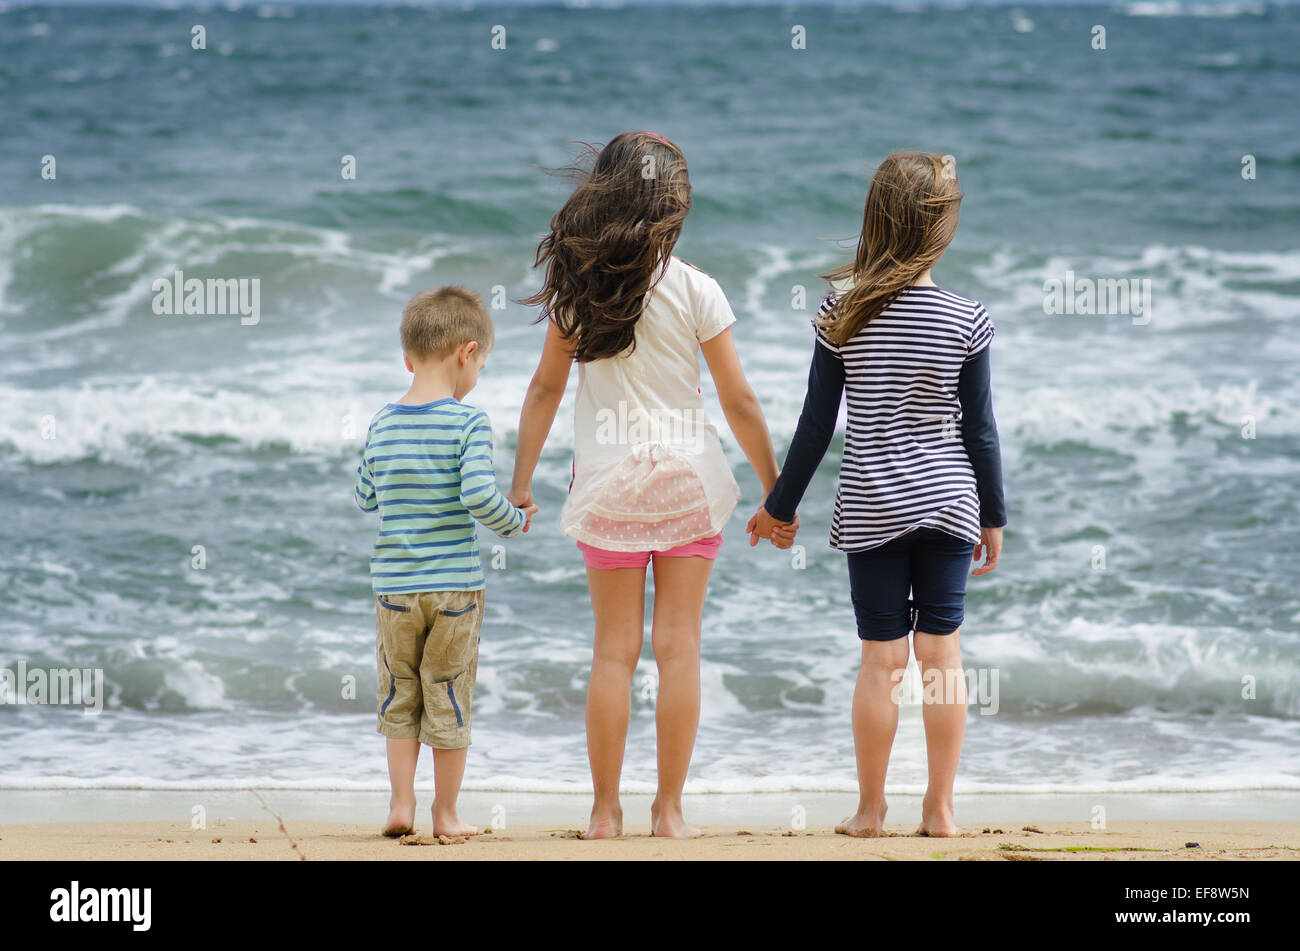 Bulgaria, Two girls (8-9) and boy (4-5) standing at by surf line holding hands looking at sea Stock Photo